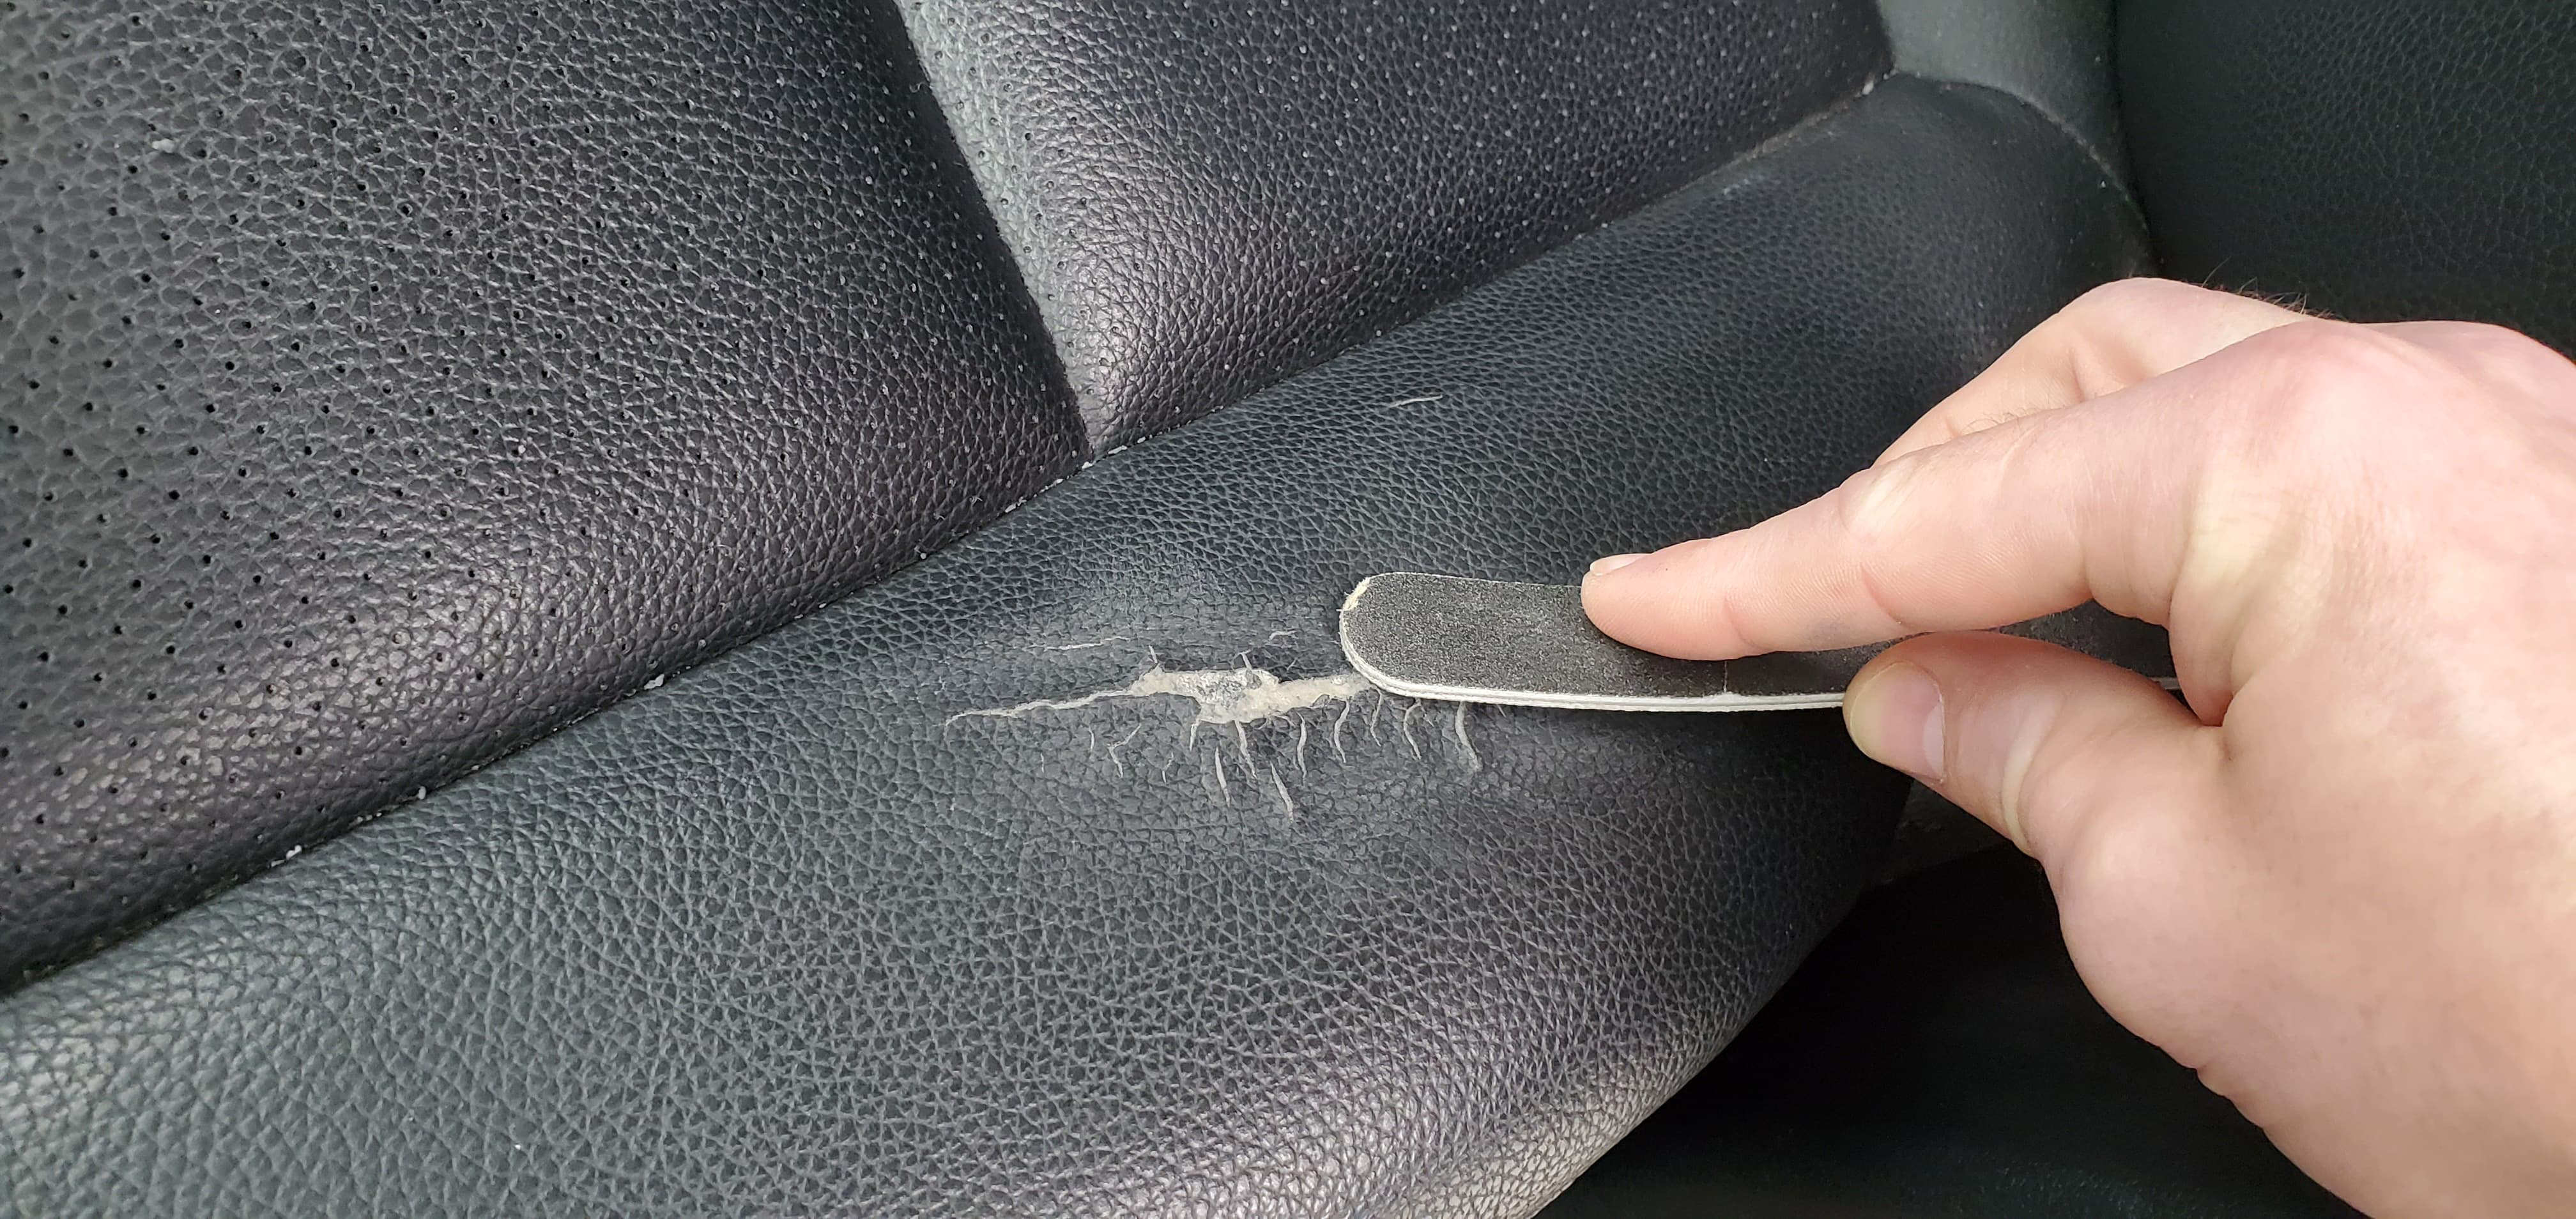 How To Repair A Leather Car Seat - How To Fix Tear In Leather Auto Seat